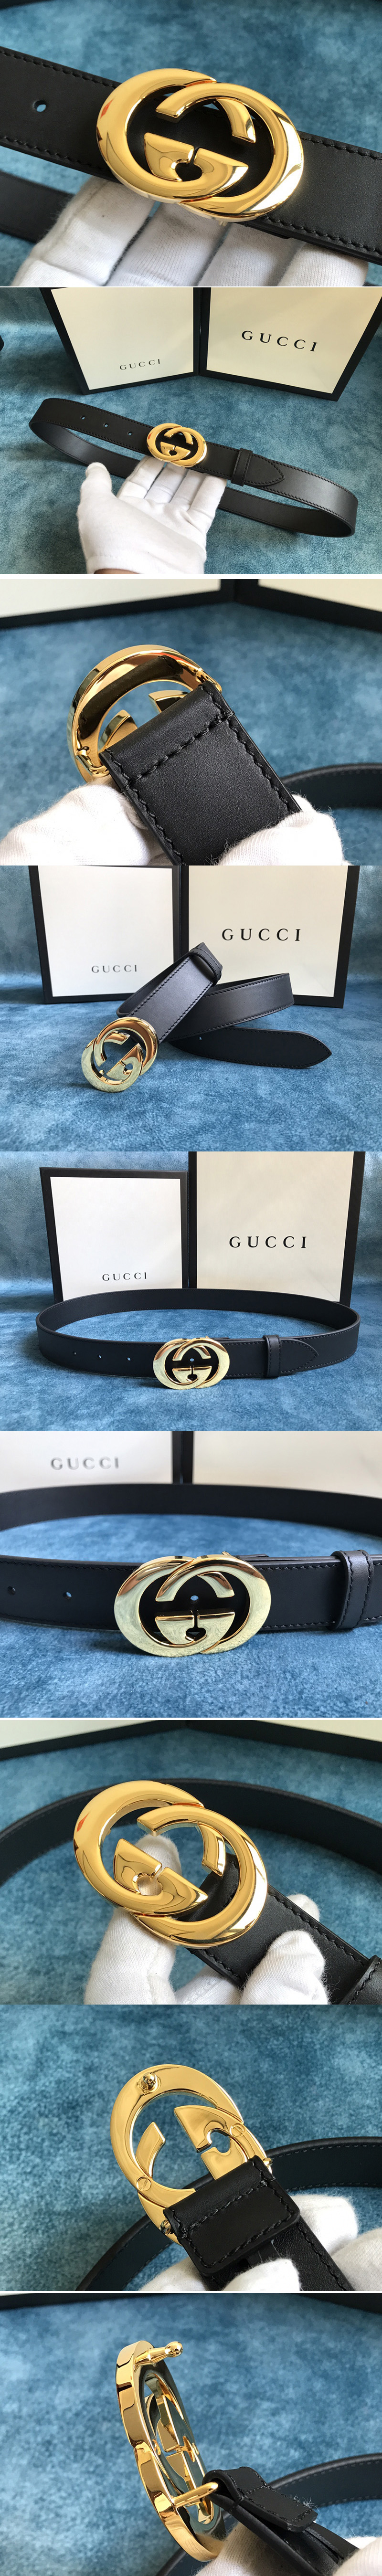 Replica Gucci 574807 30mm Belt with Shiny Gold Interlocking G buckle in Black Leather